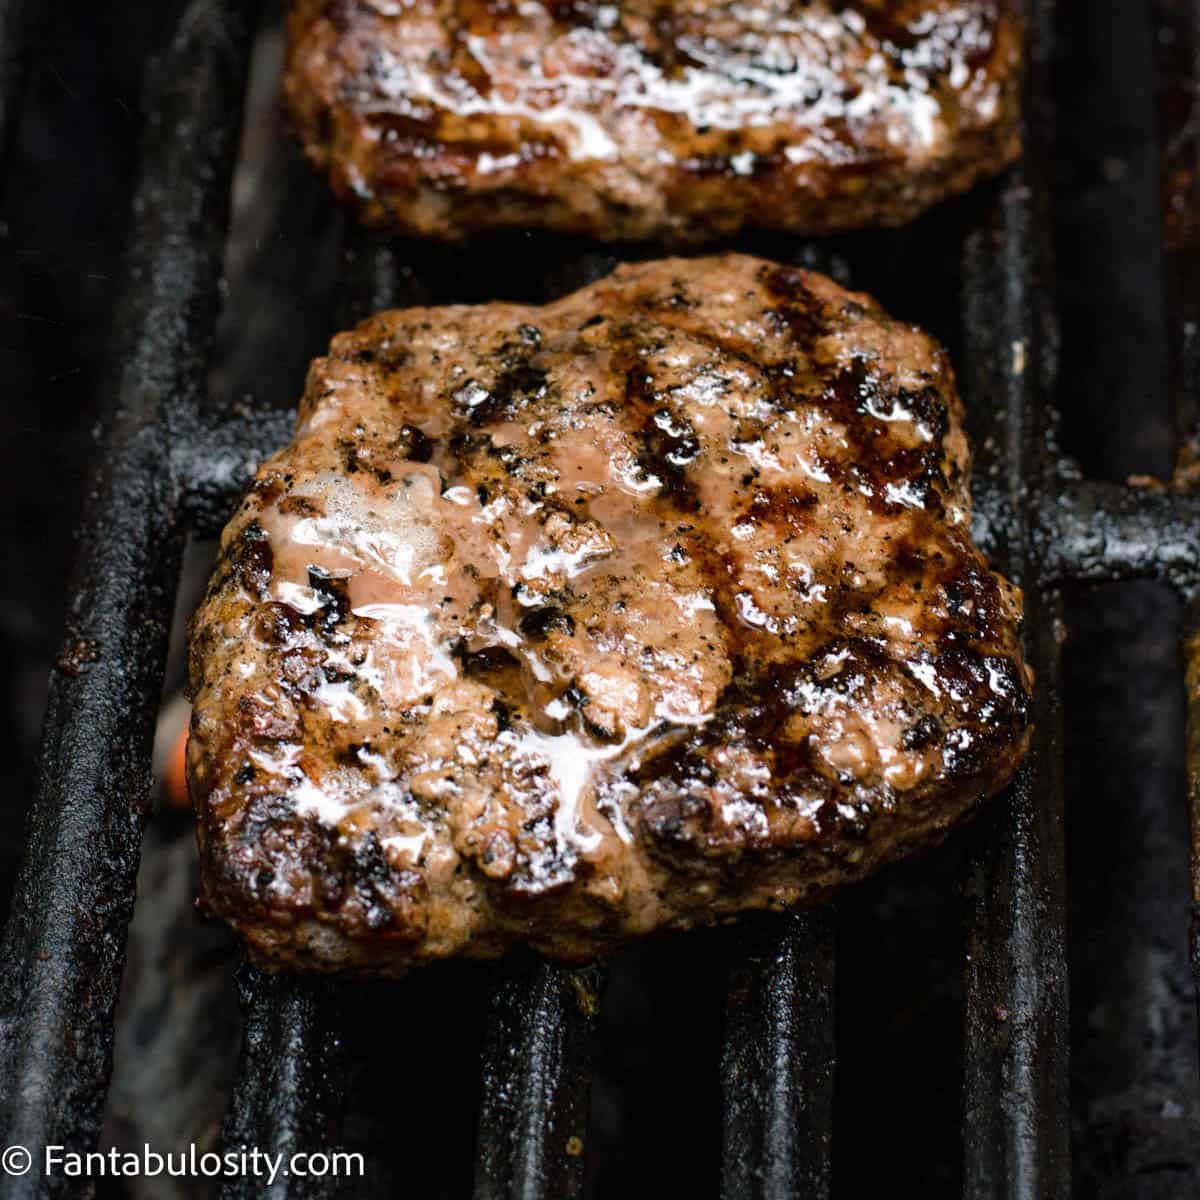 cooked burger patties on the grill